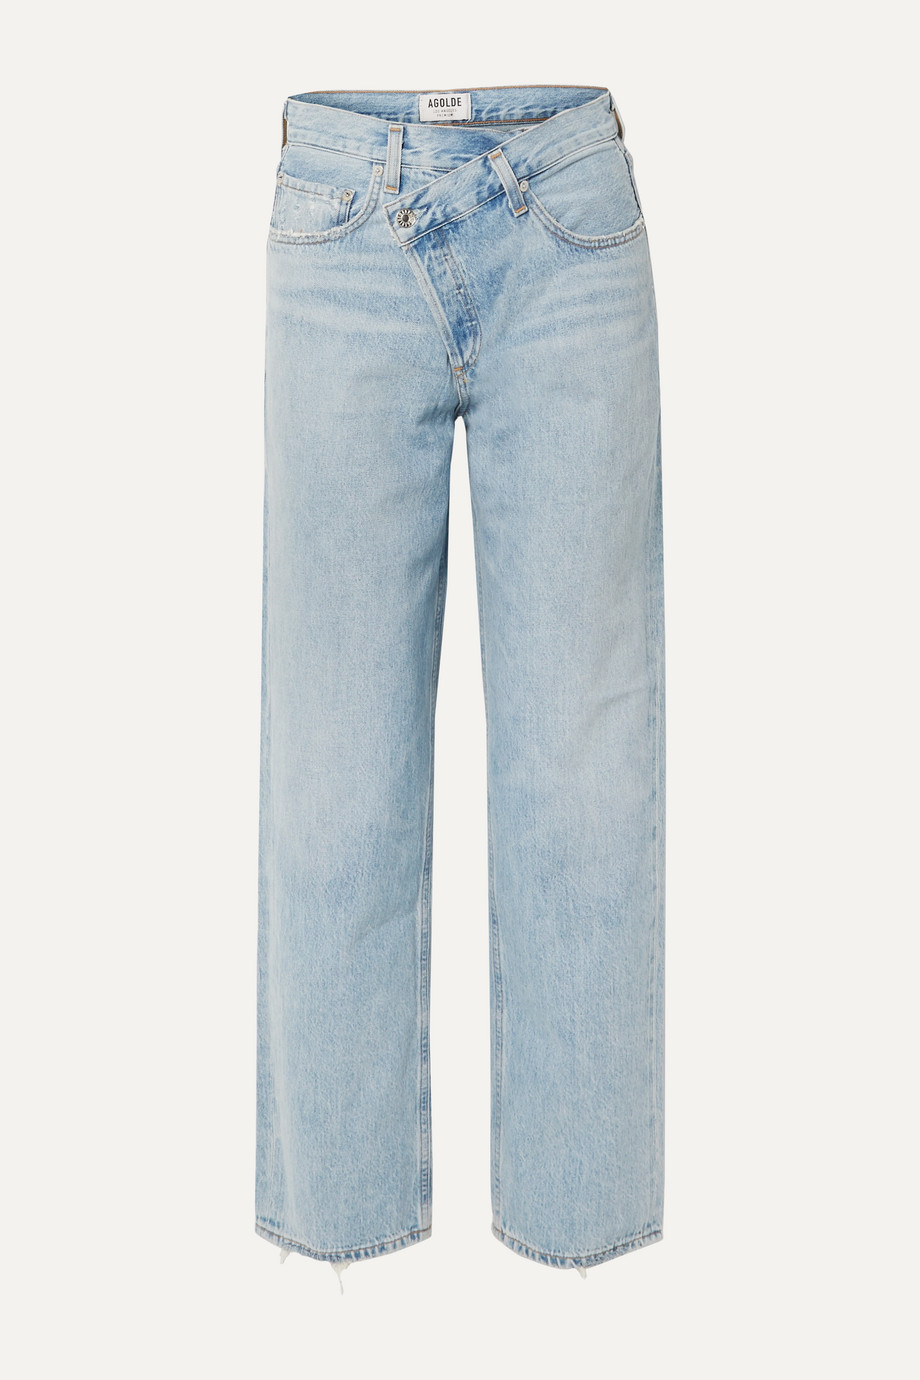 Agolde's Criss-Cross Jeans Have Reached Cult Status | Who What Wear UK